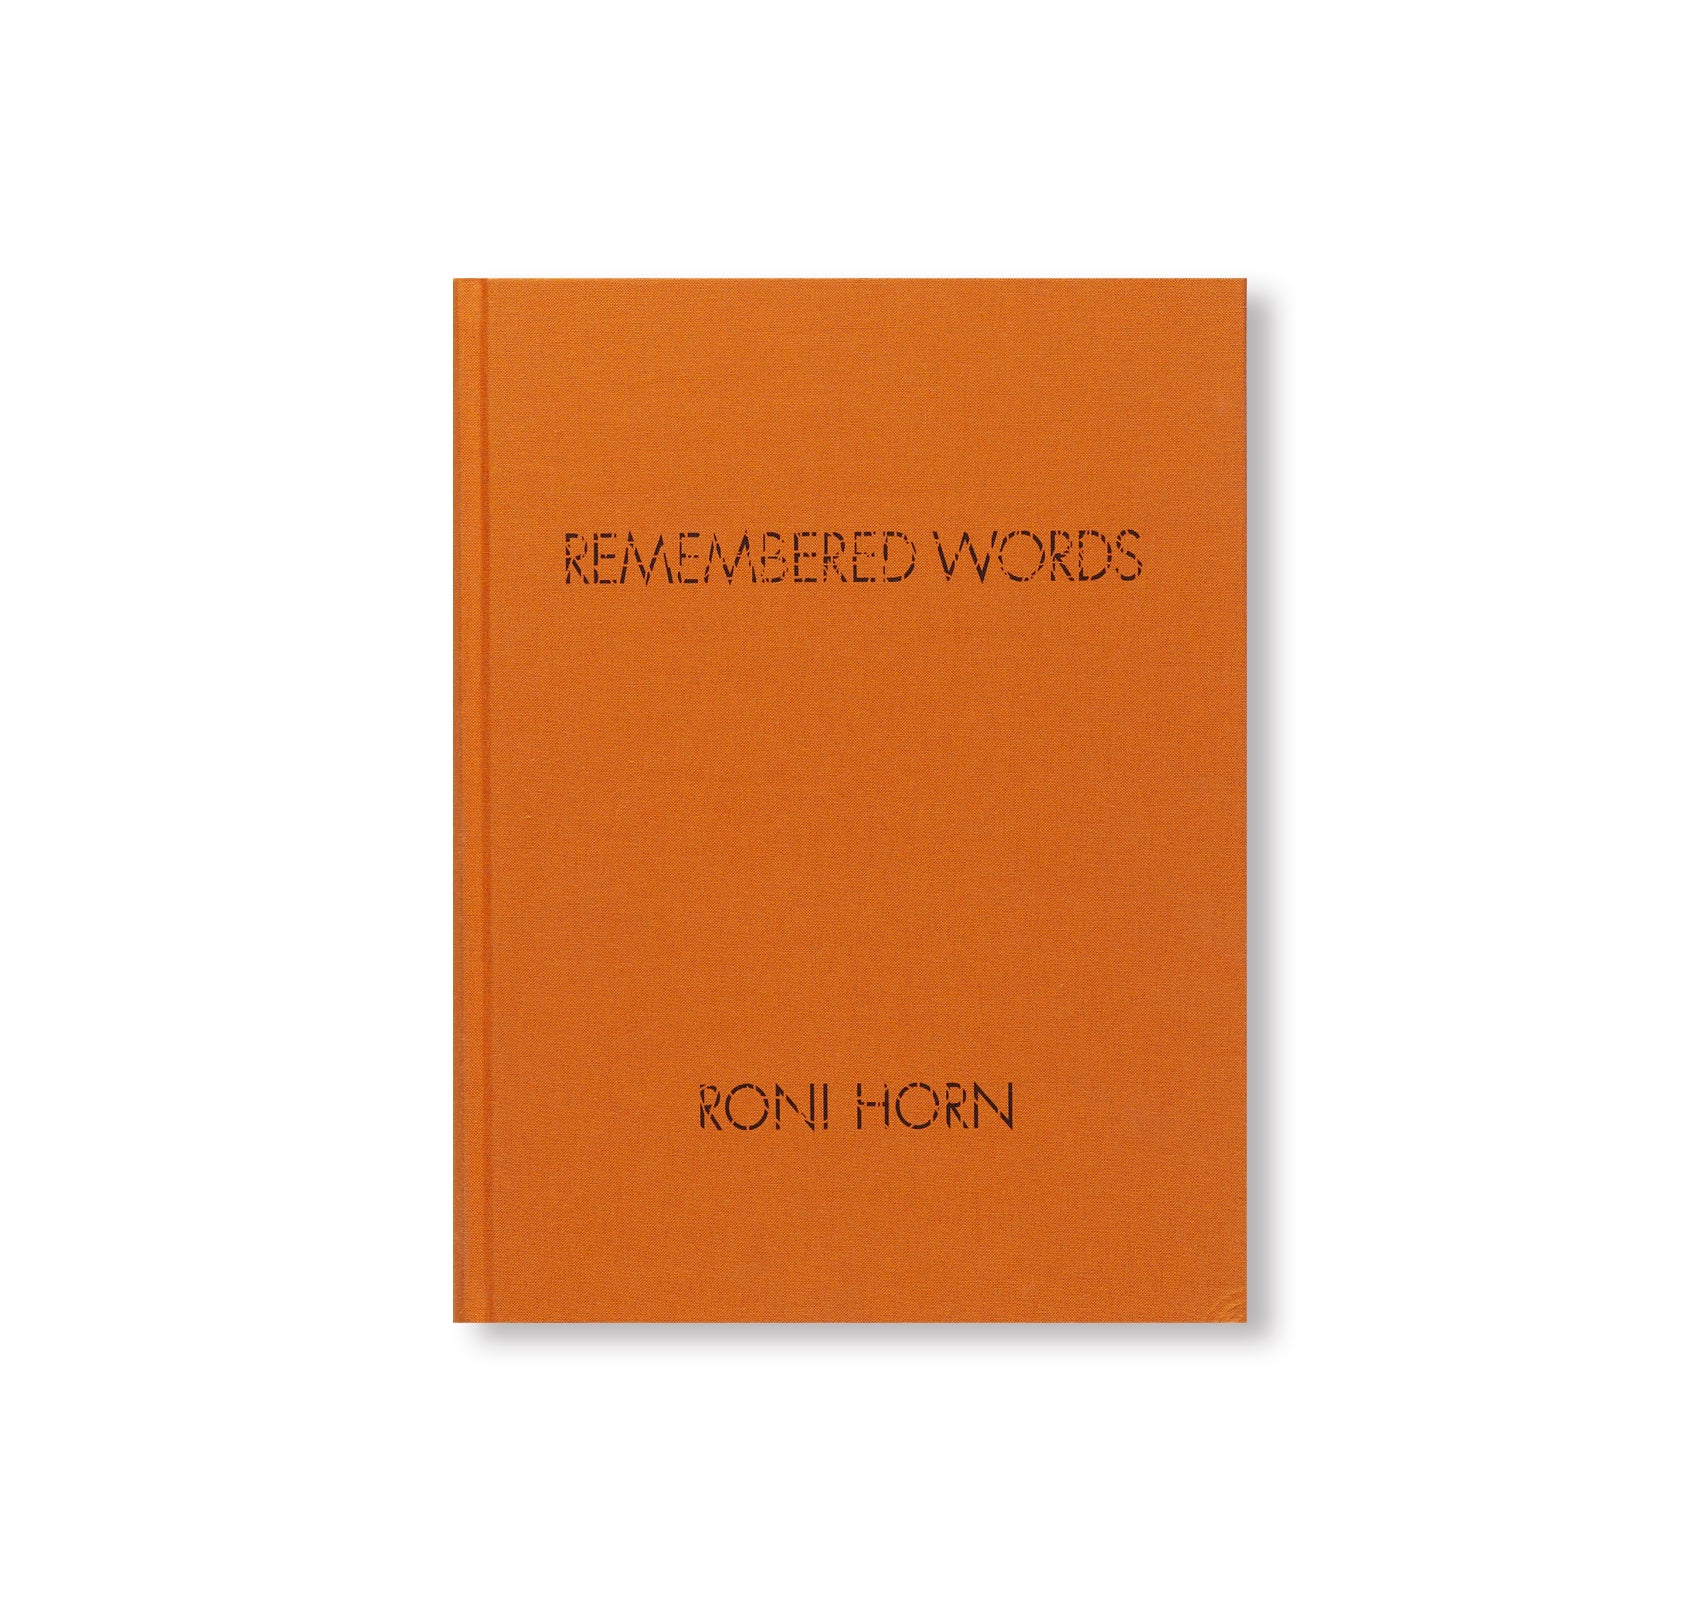 REMEMBERED WORDS by Roni Horn